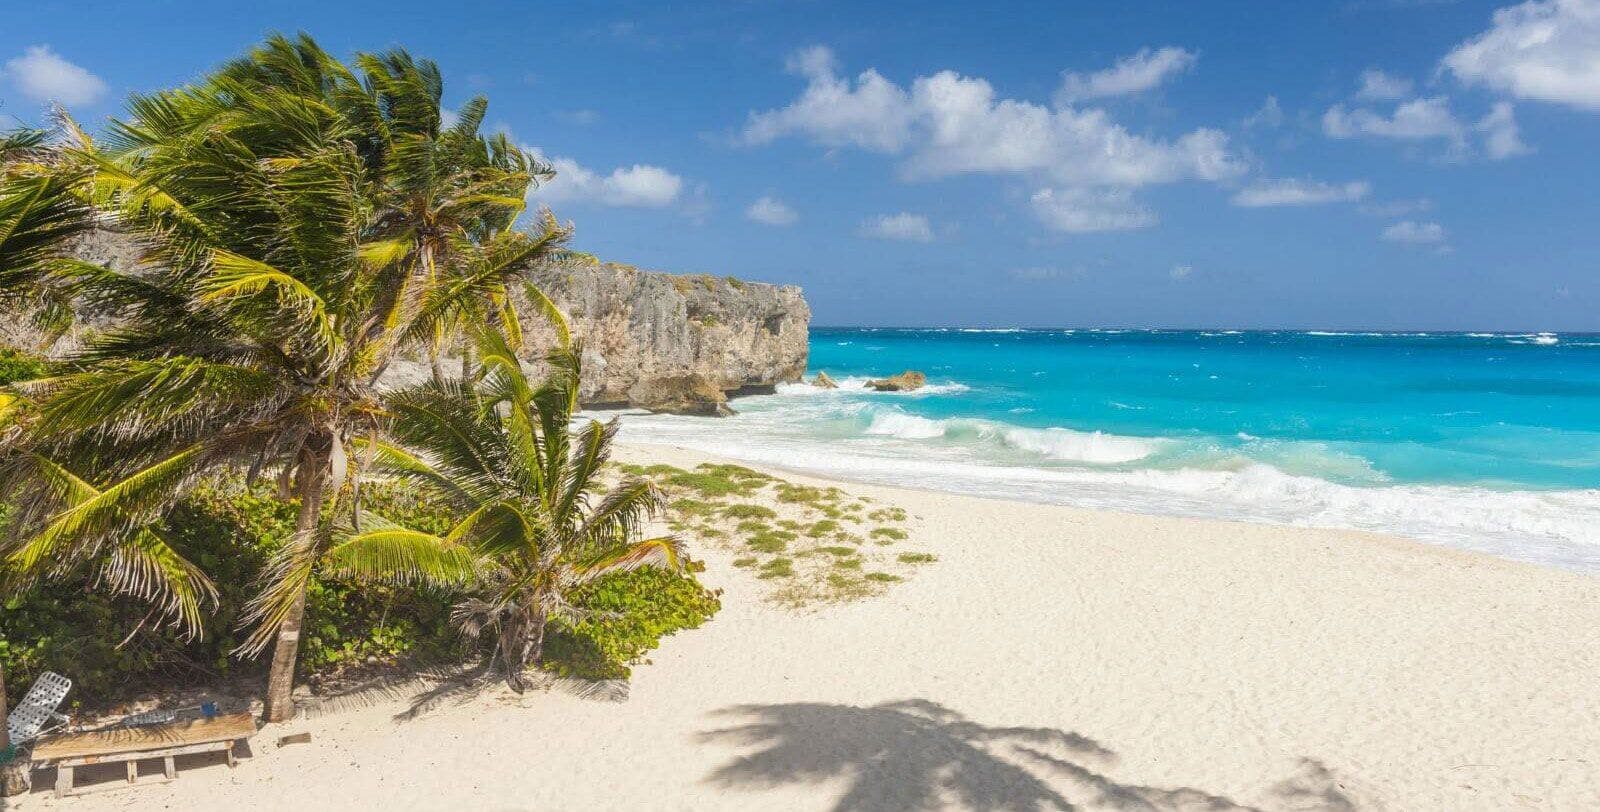 White sand beach with cliffs and palm trees in Barbados